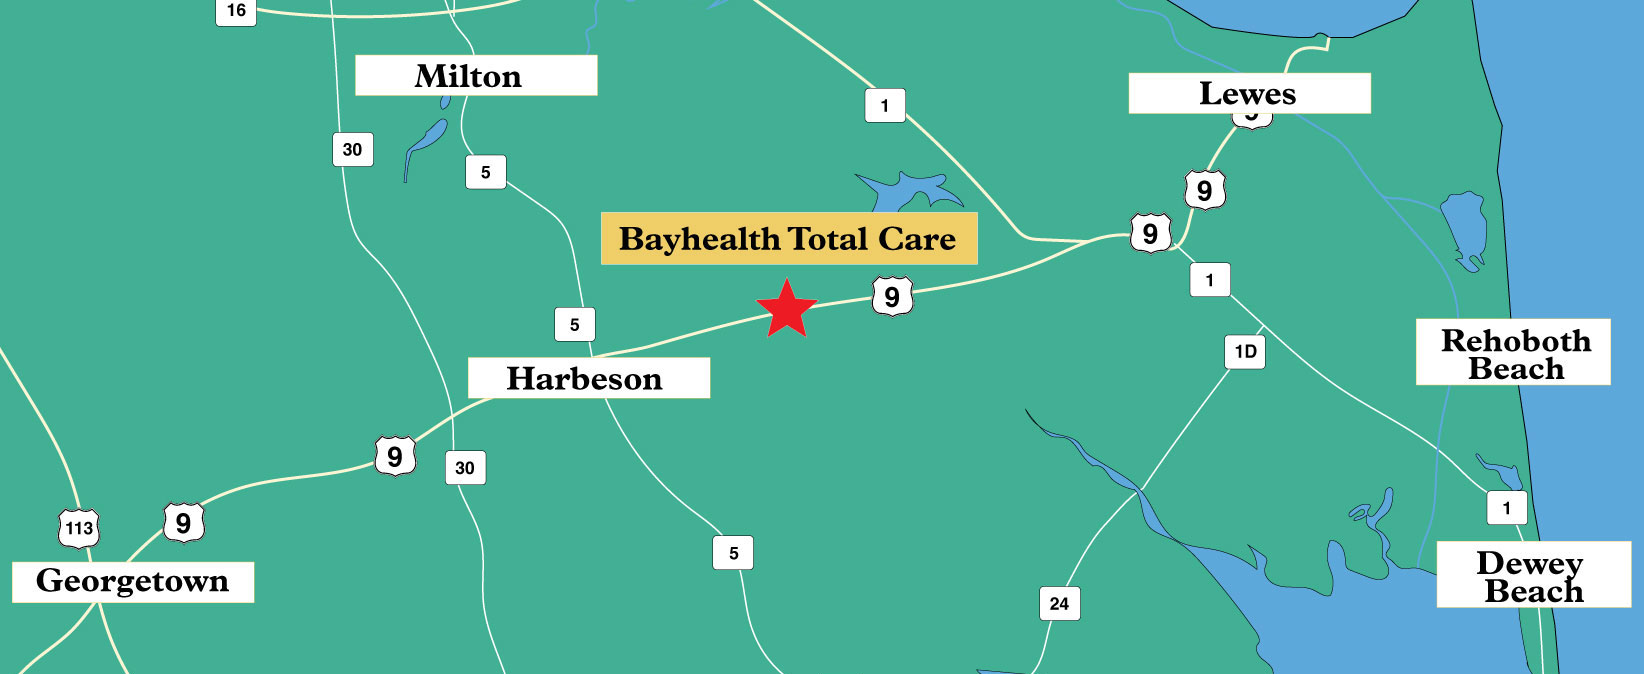 Bayhealth Total Care Sussex County Map